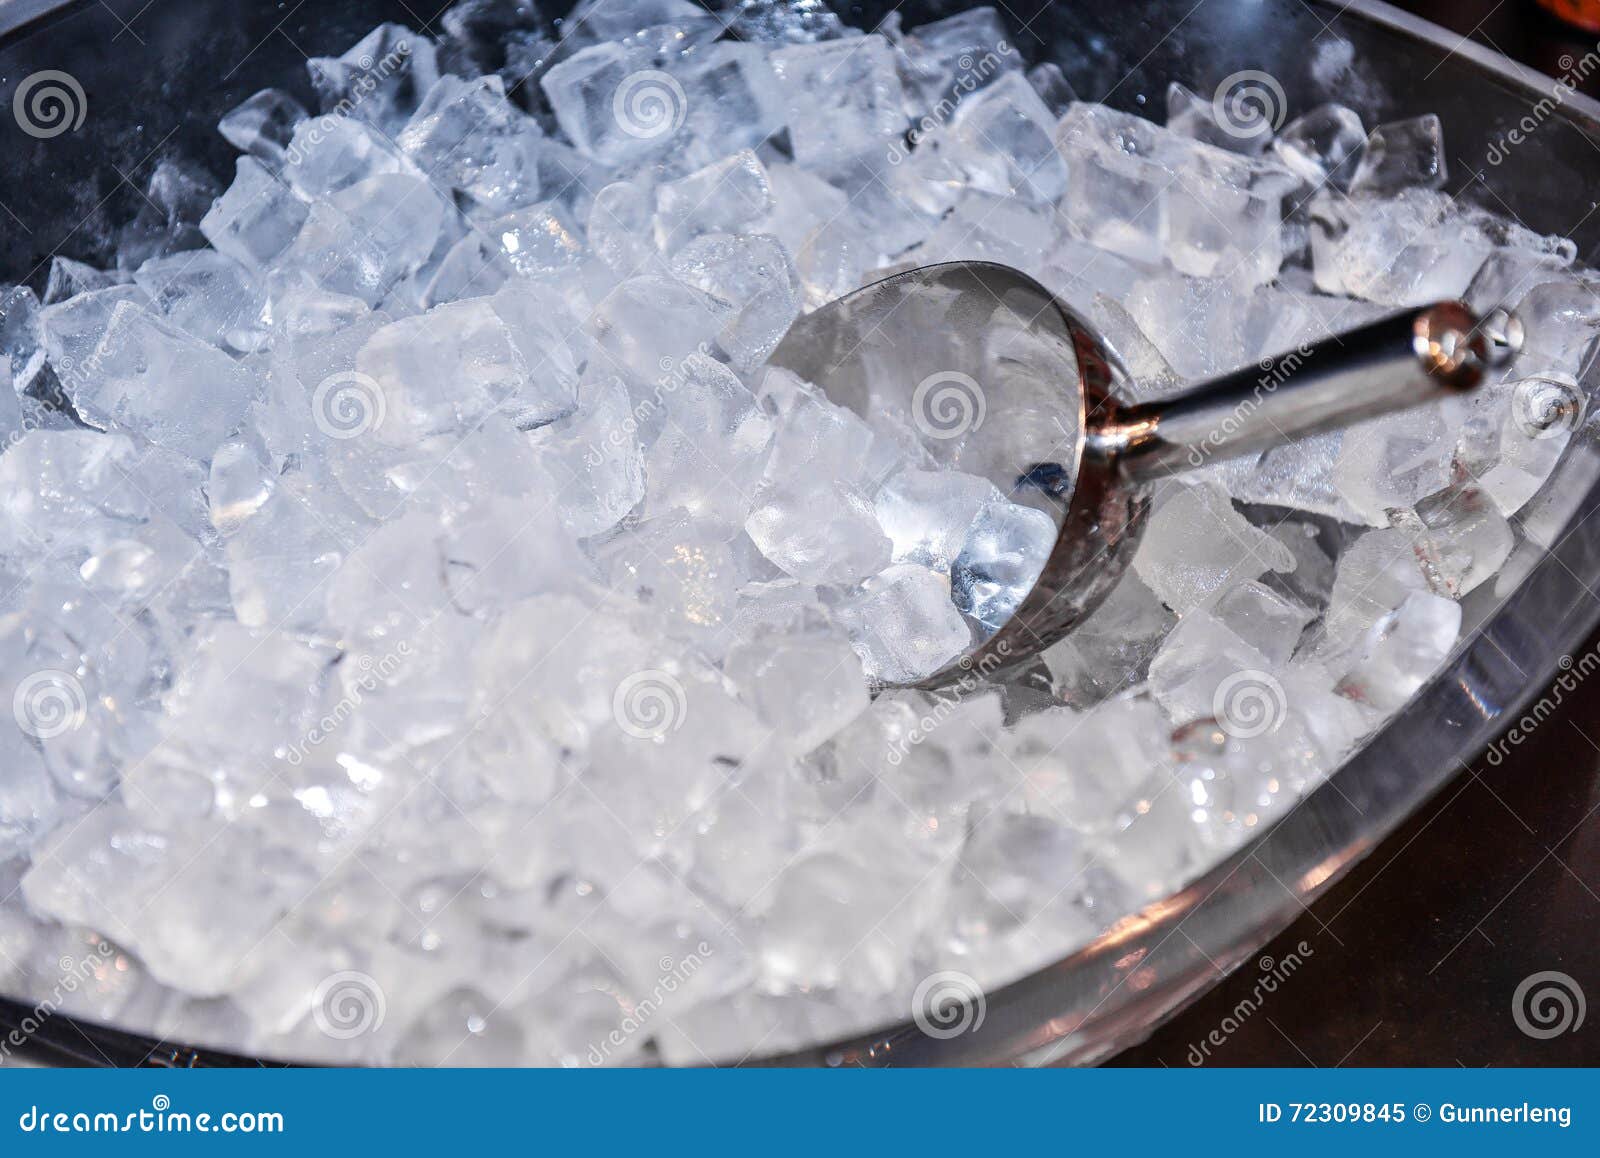 ice with scoop in ice bucket